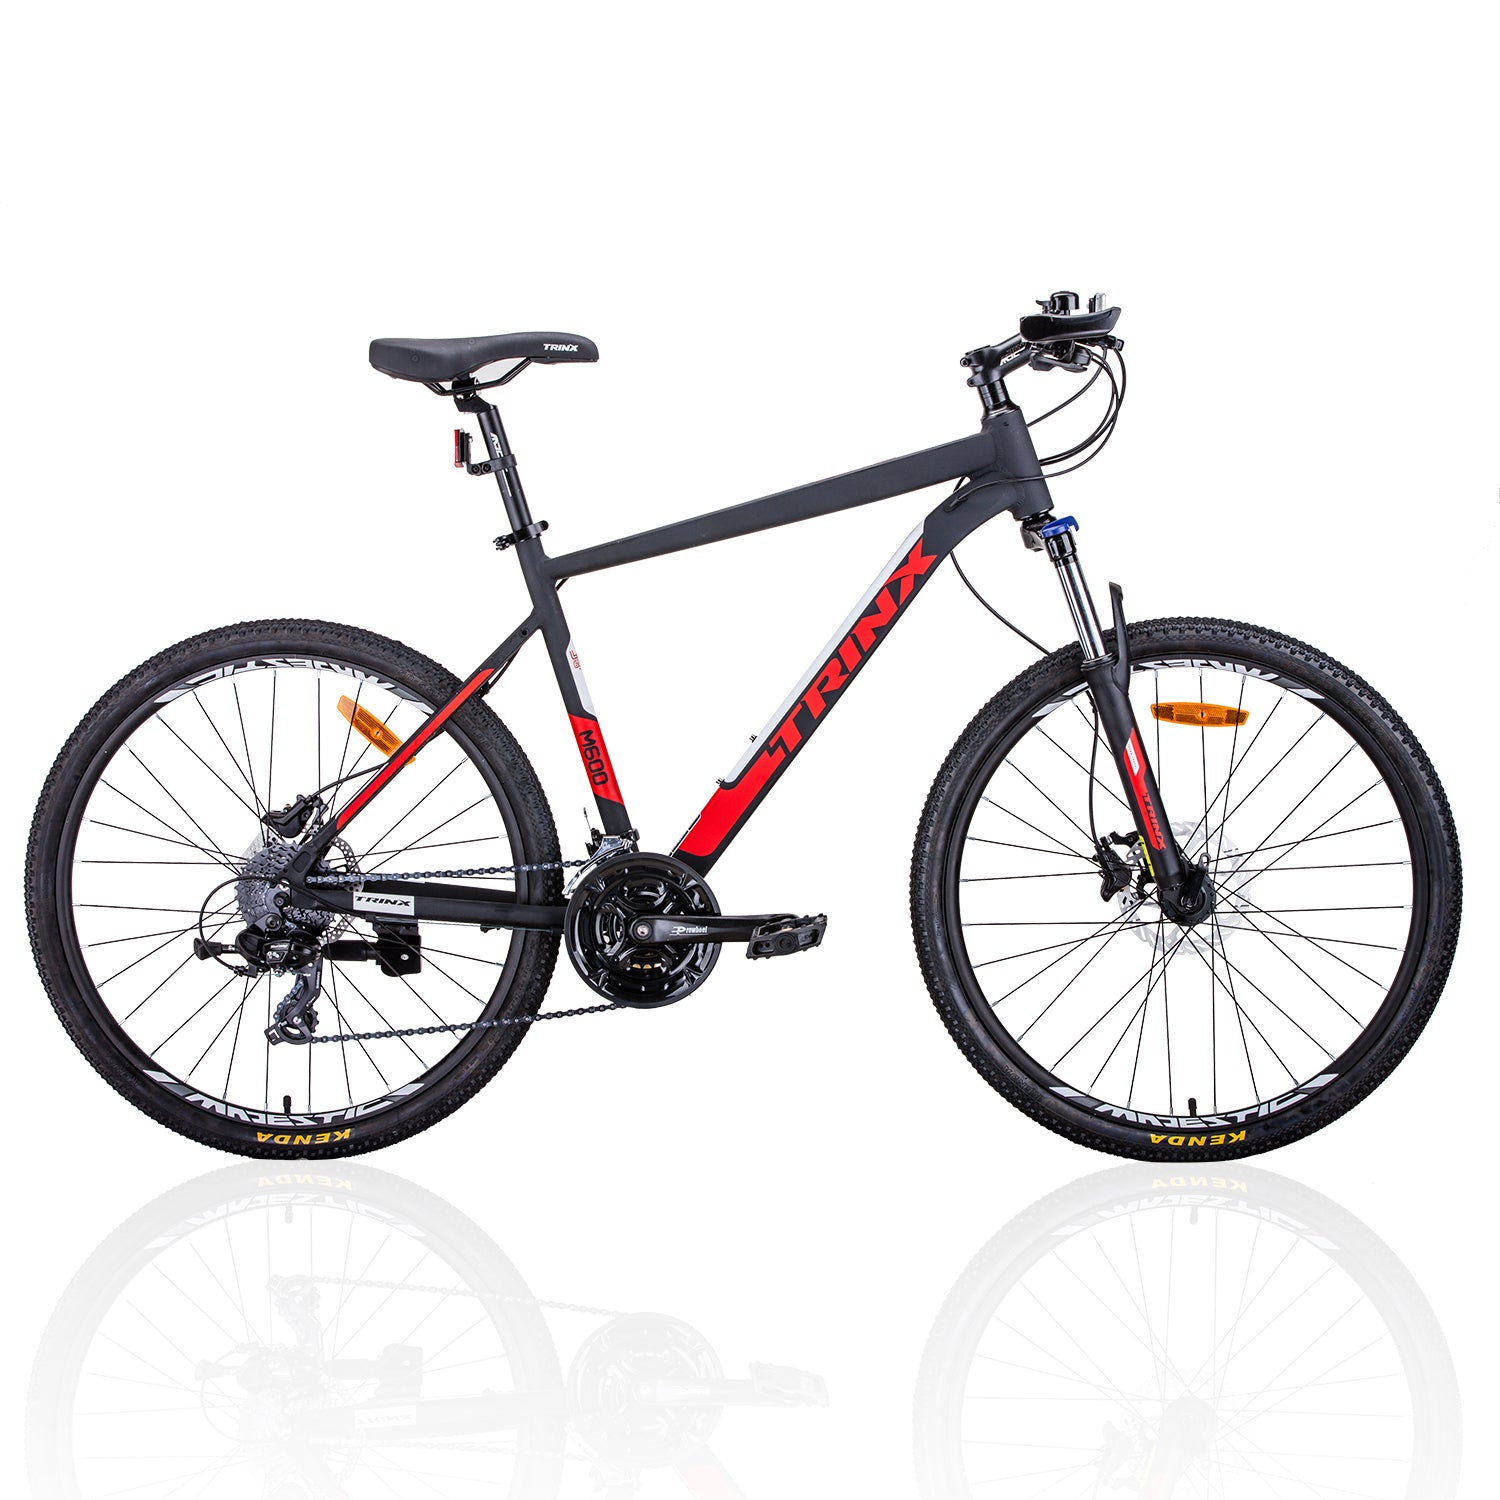 Trinx M600 Mountain Bike 24 Speed MTB Bicycle 17 Inches Frame Red